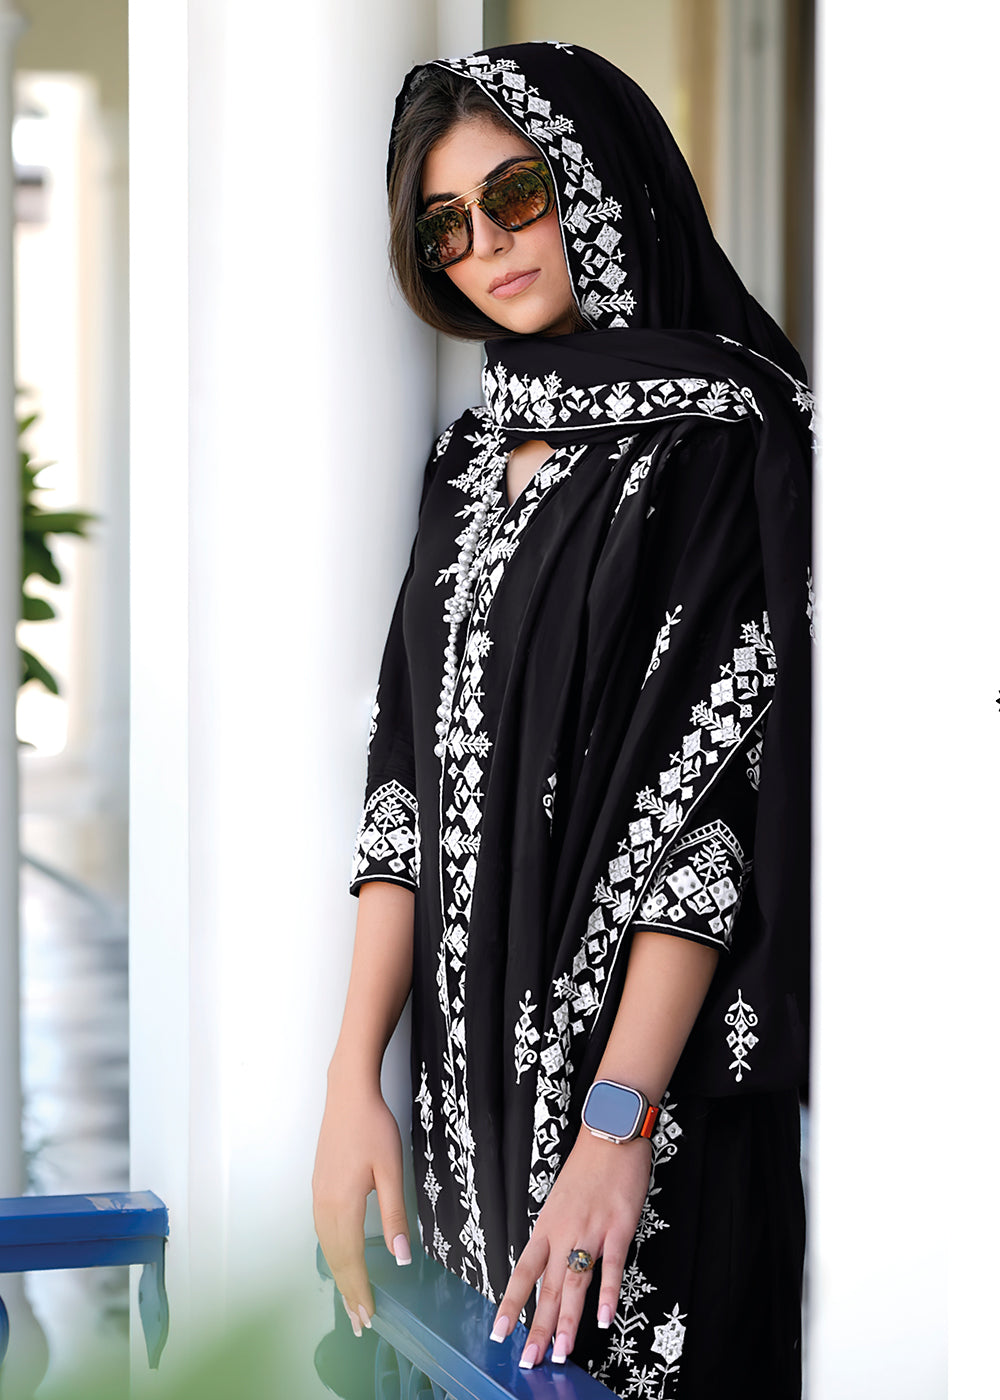 Shop Now Appealing Black Mal Mal Embroidered Festive Sharara Suit Online at Empress Clothing in USA, UK, Canada, Italy & Worldwide. 